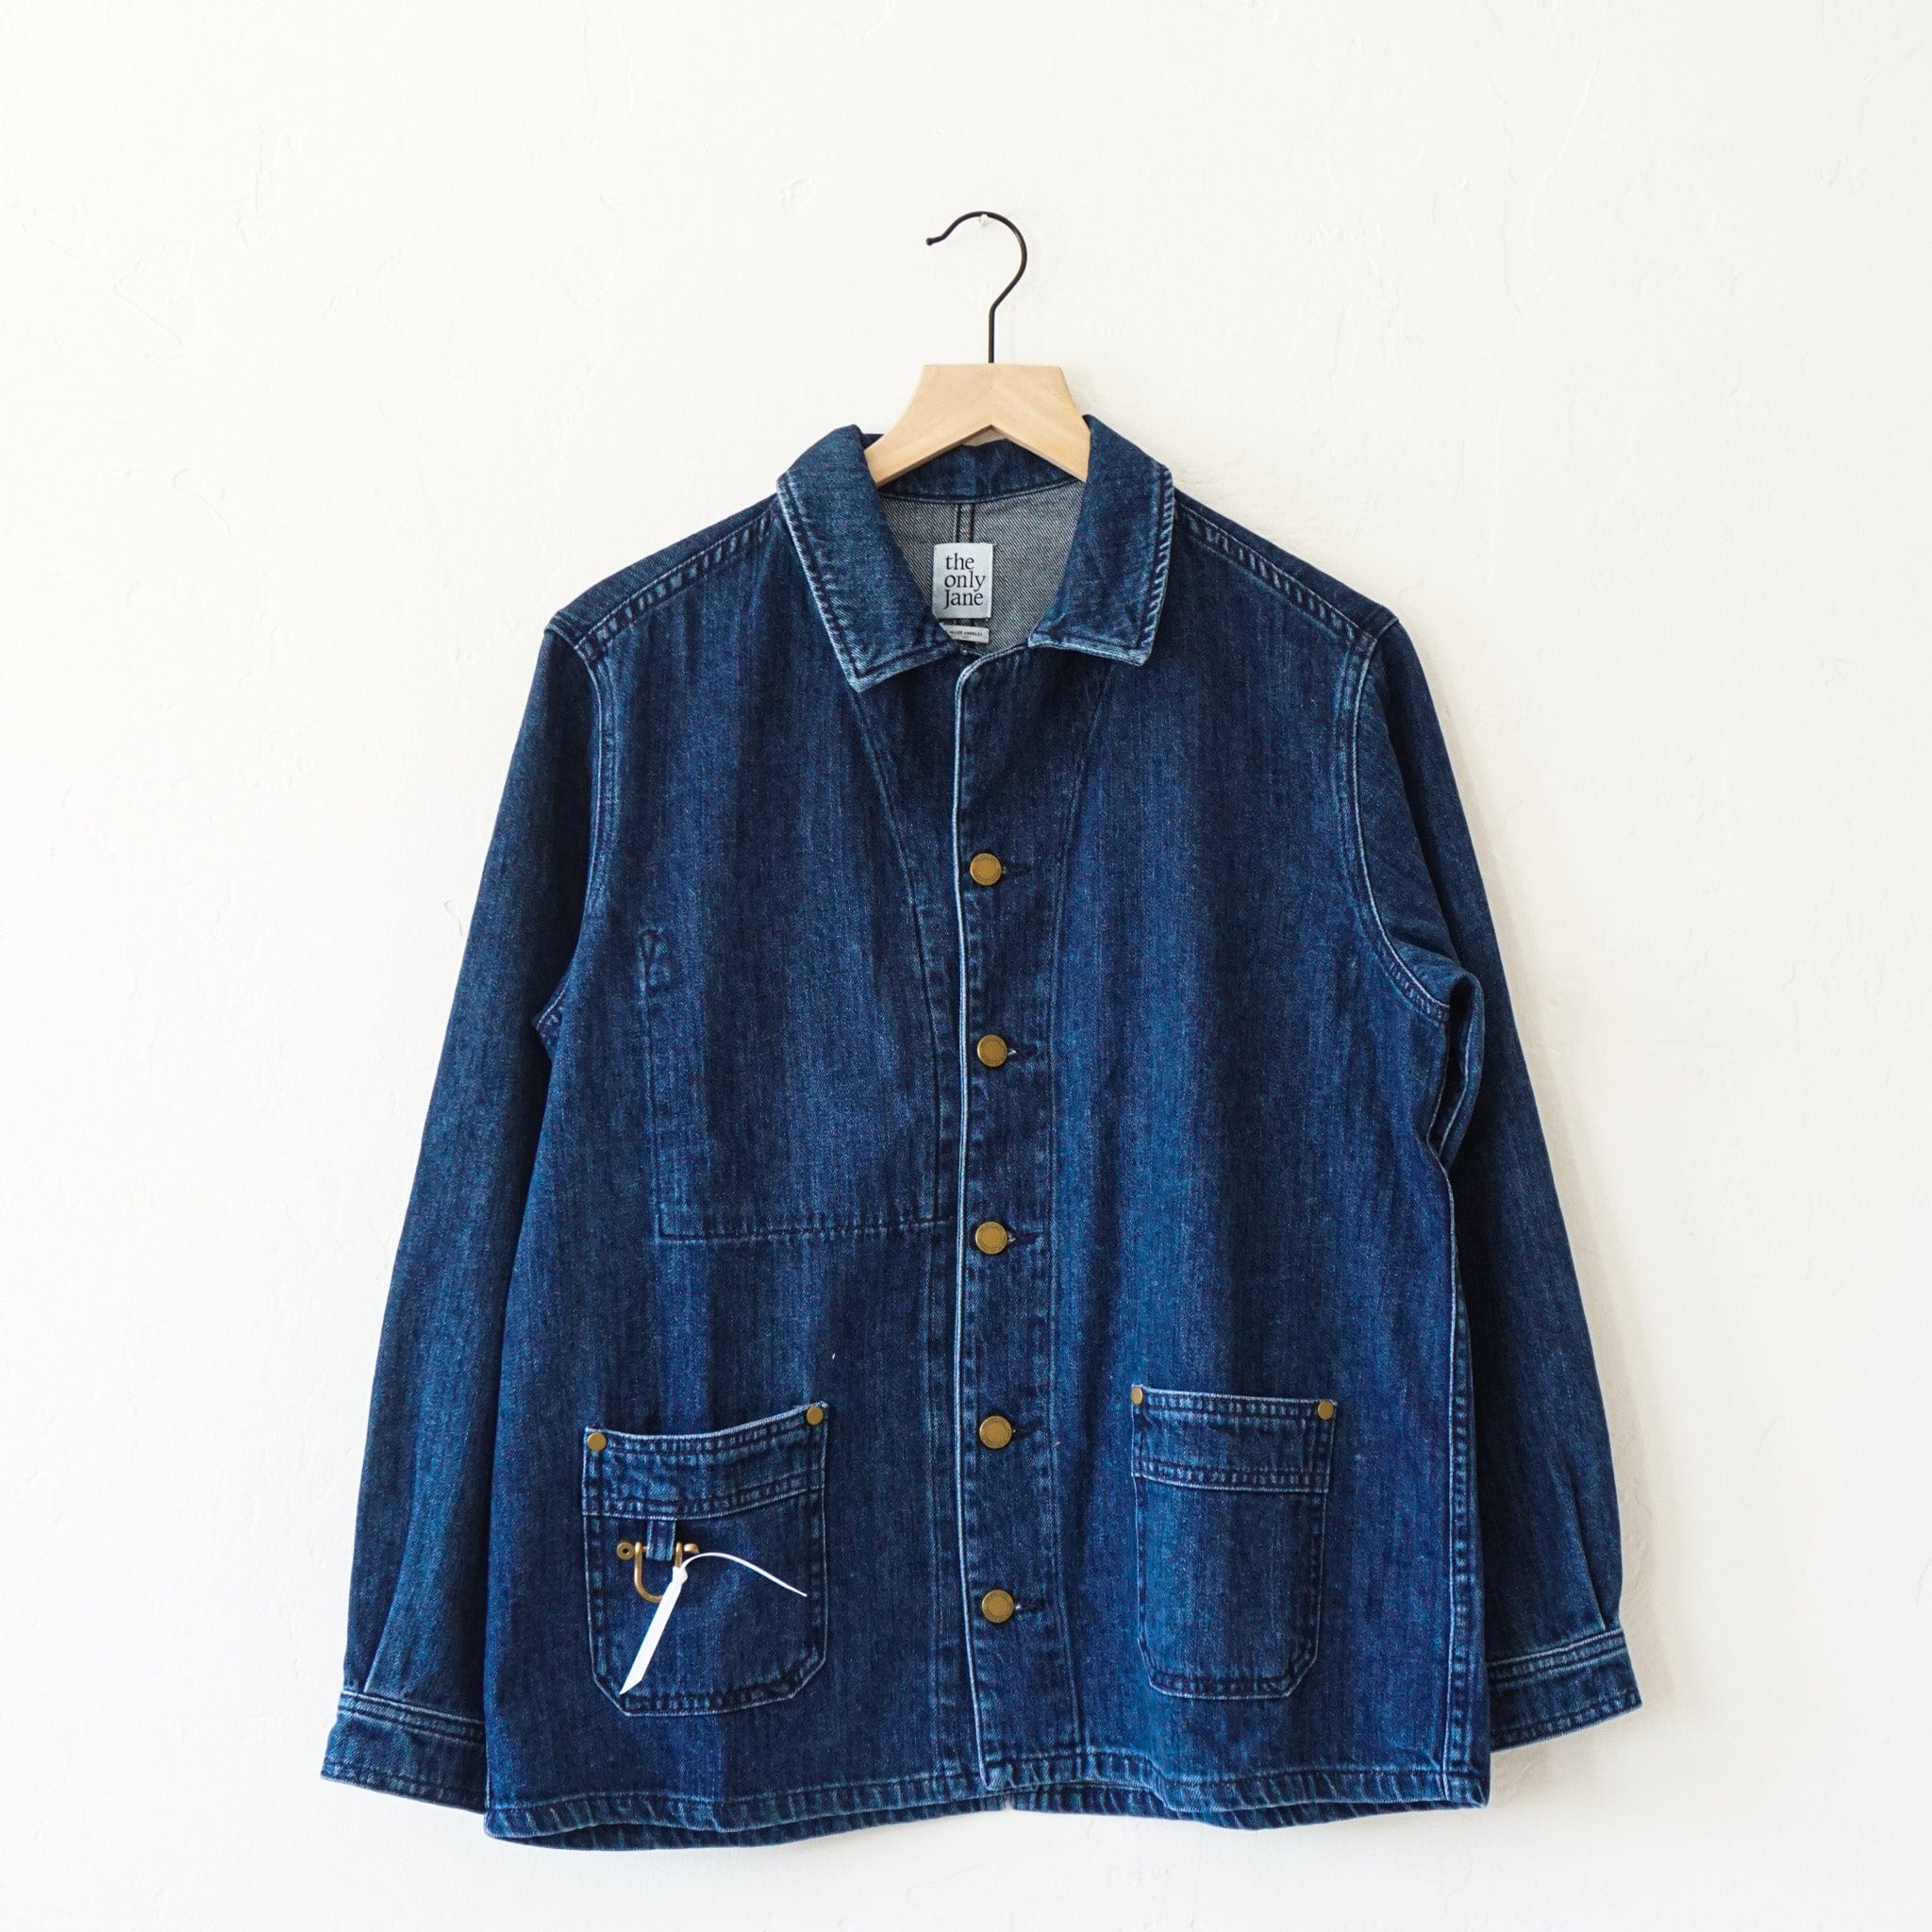 Only Jane Apparel & Accessories Extra Small The Only Jane Jacket - Dark Indigo